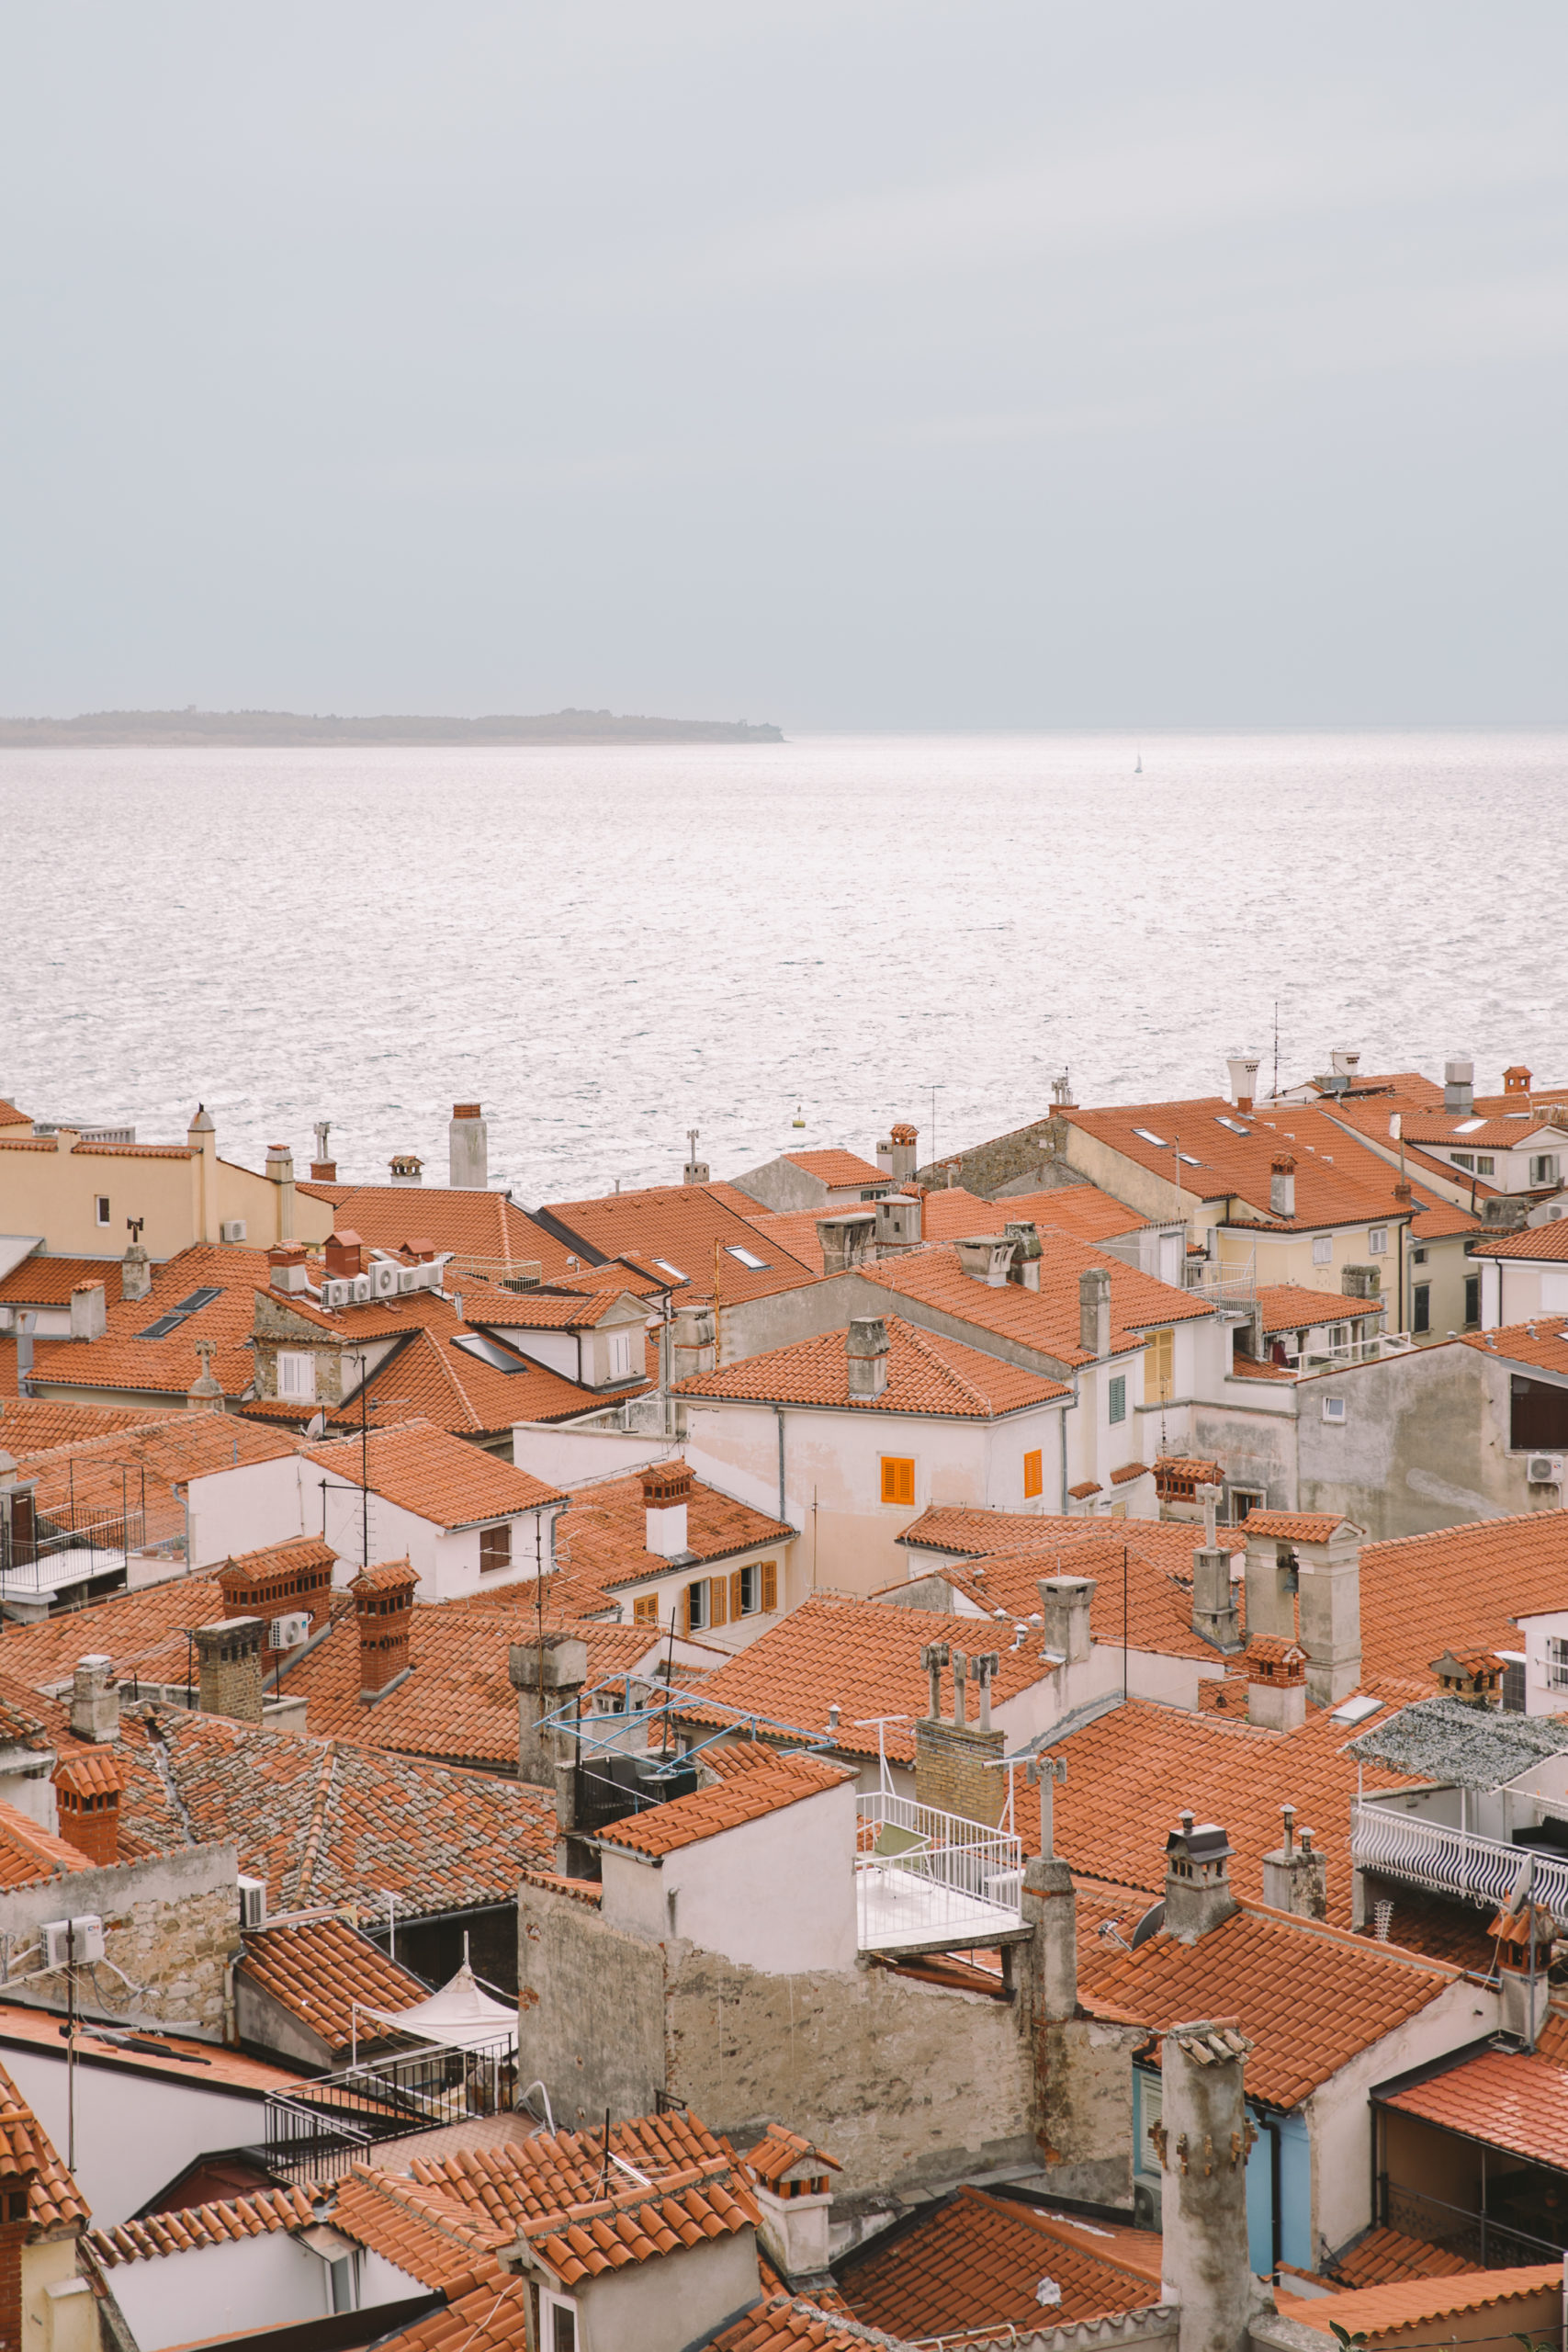 Piran - A Picturesque seaside town